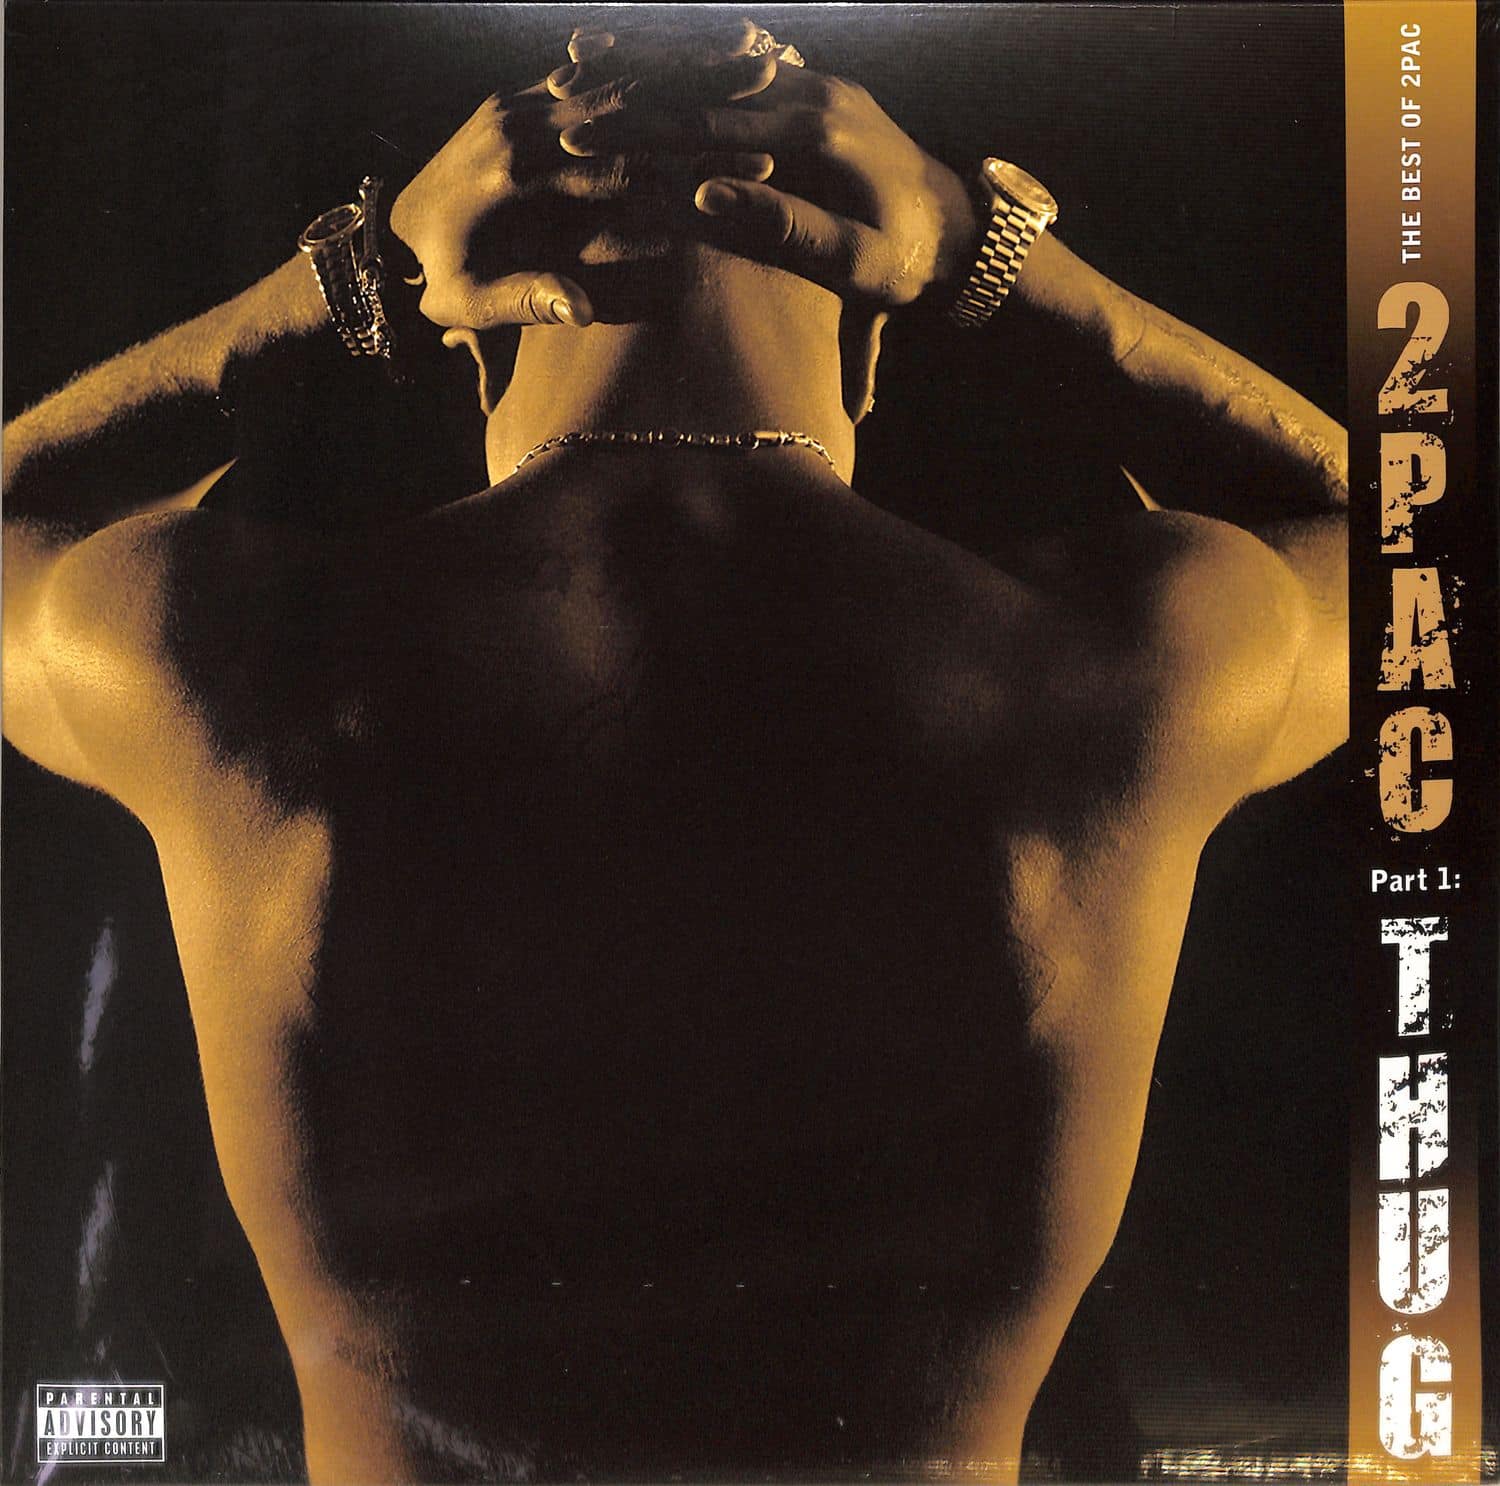 2Pac - THE BEST OF 2PAC - PART 1: THUG 